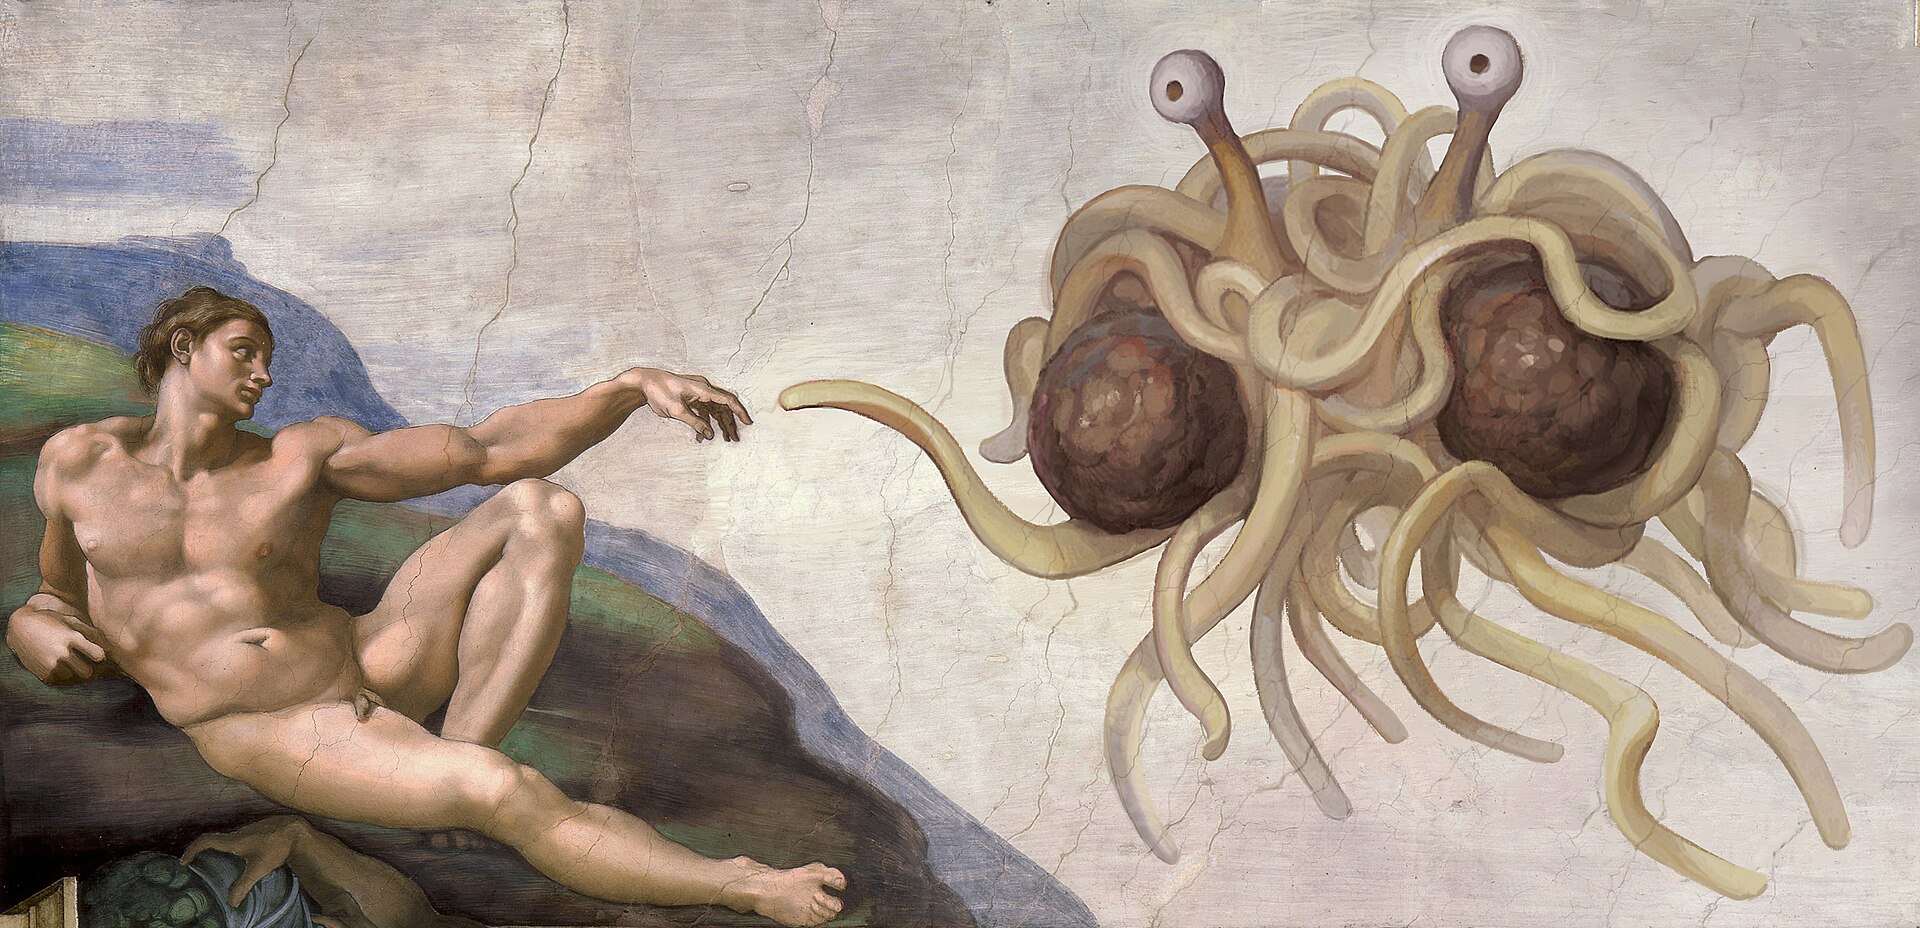 1920px-Touched_by_His_Noodly_Appendage_HD.jpg